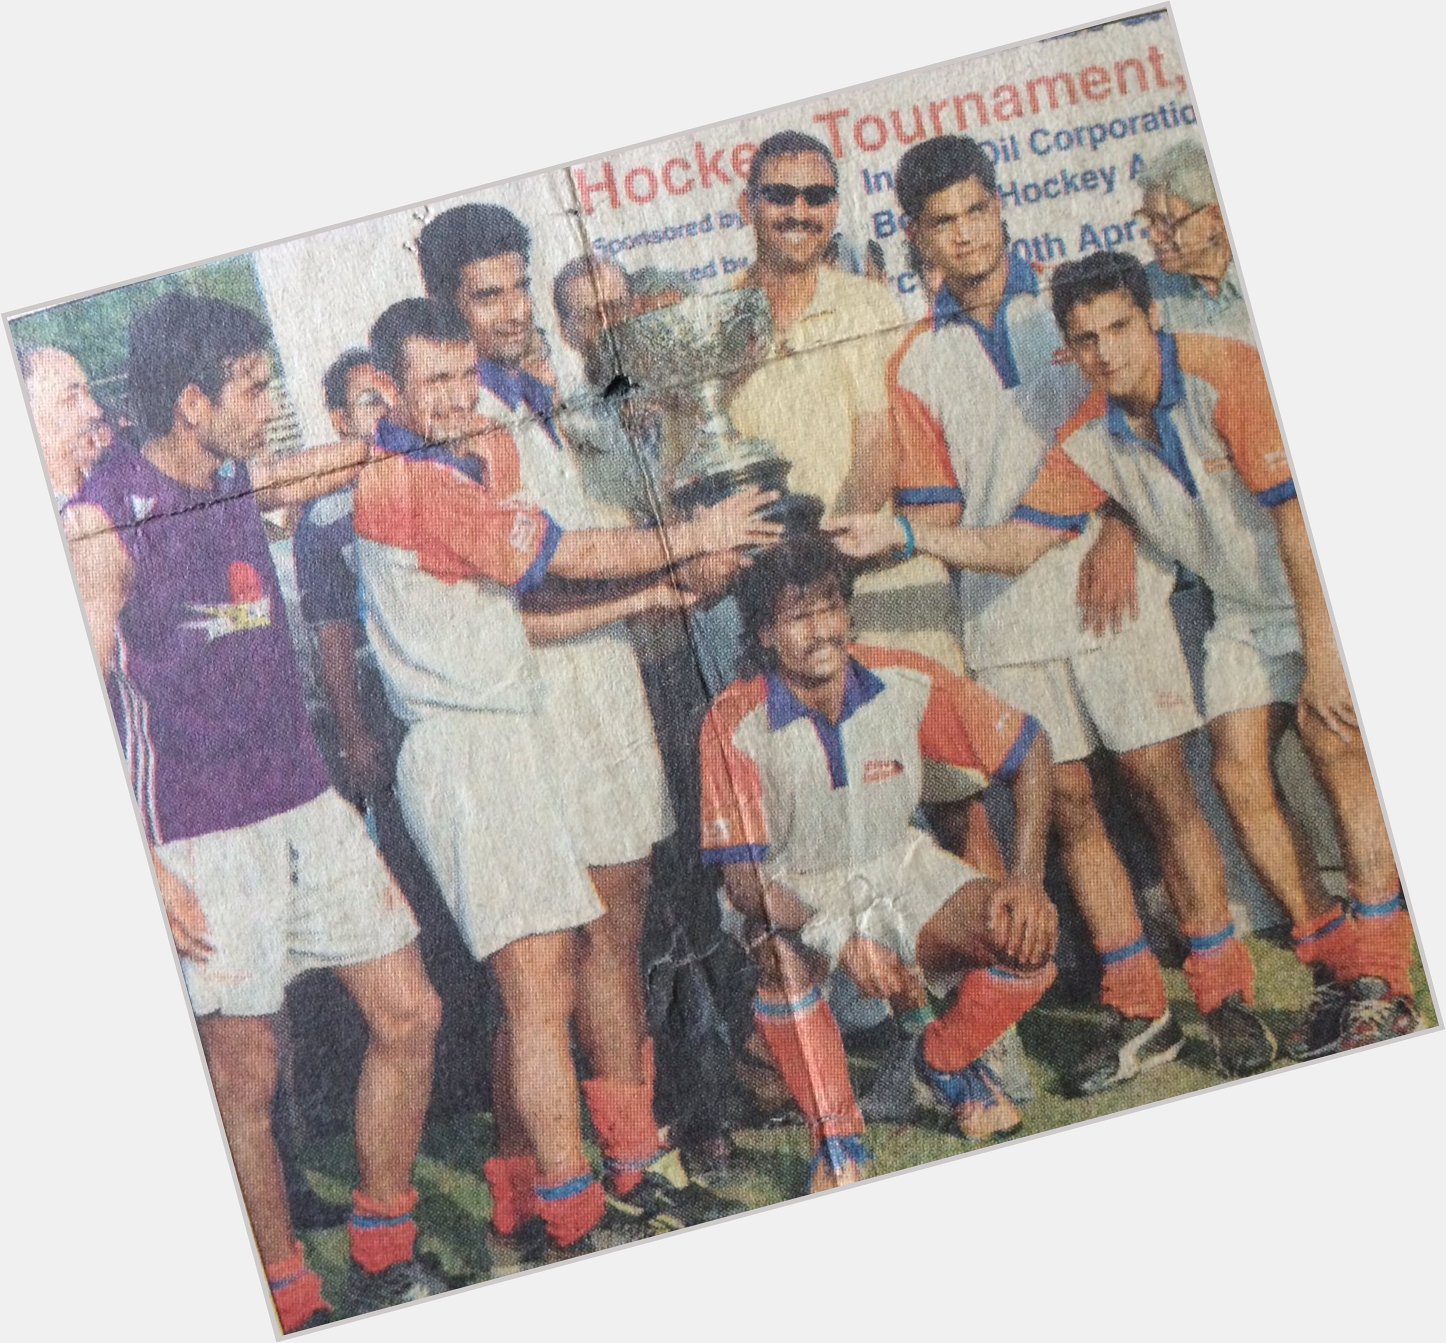 Very happy birthday legendary Dhanraj pillay .i m very lucky I played with u and spend a good time with u . 